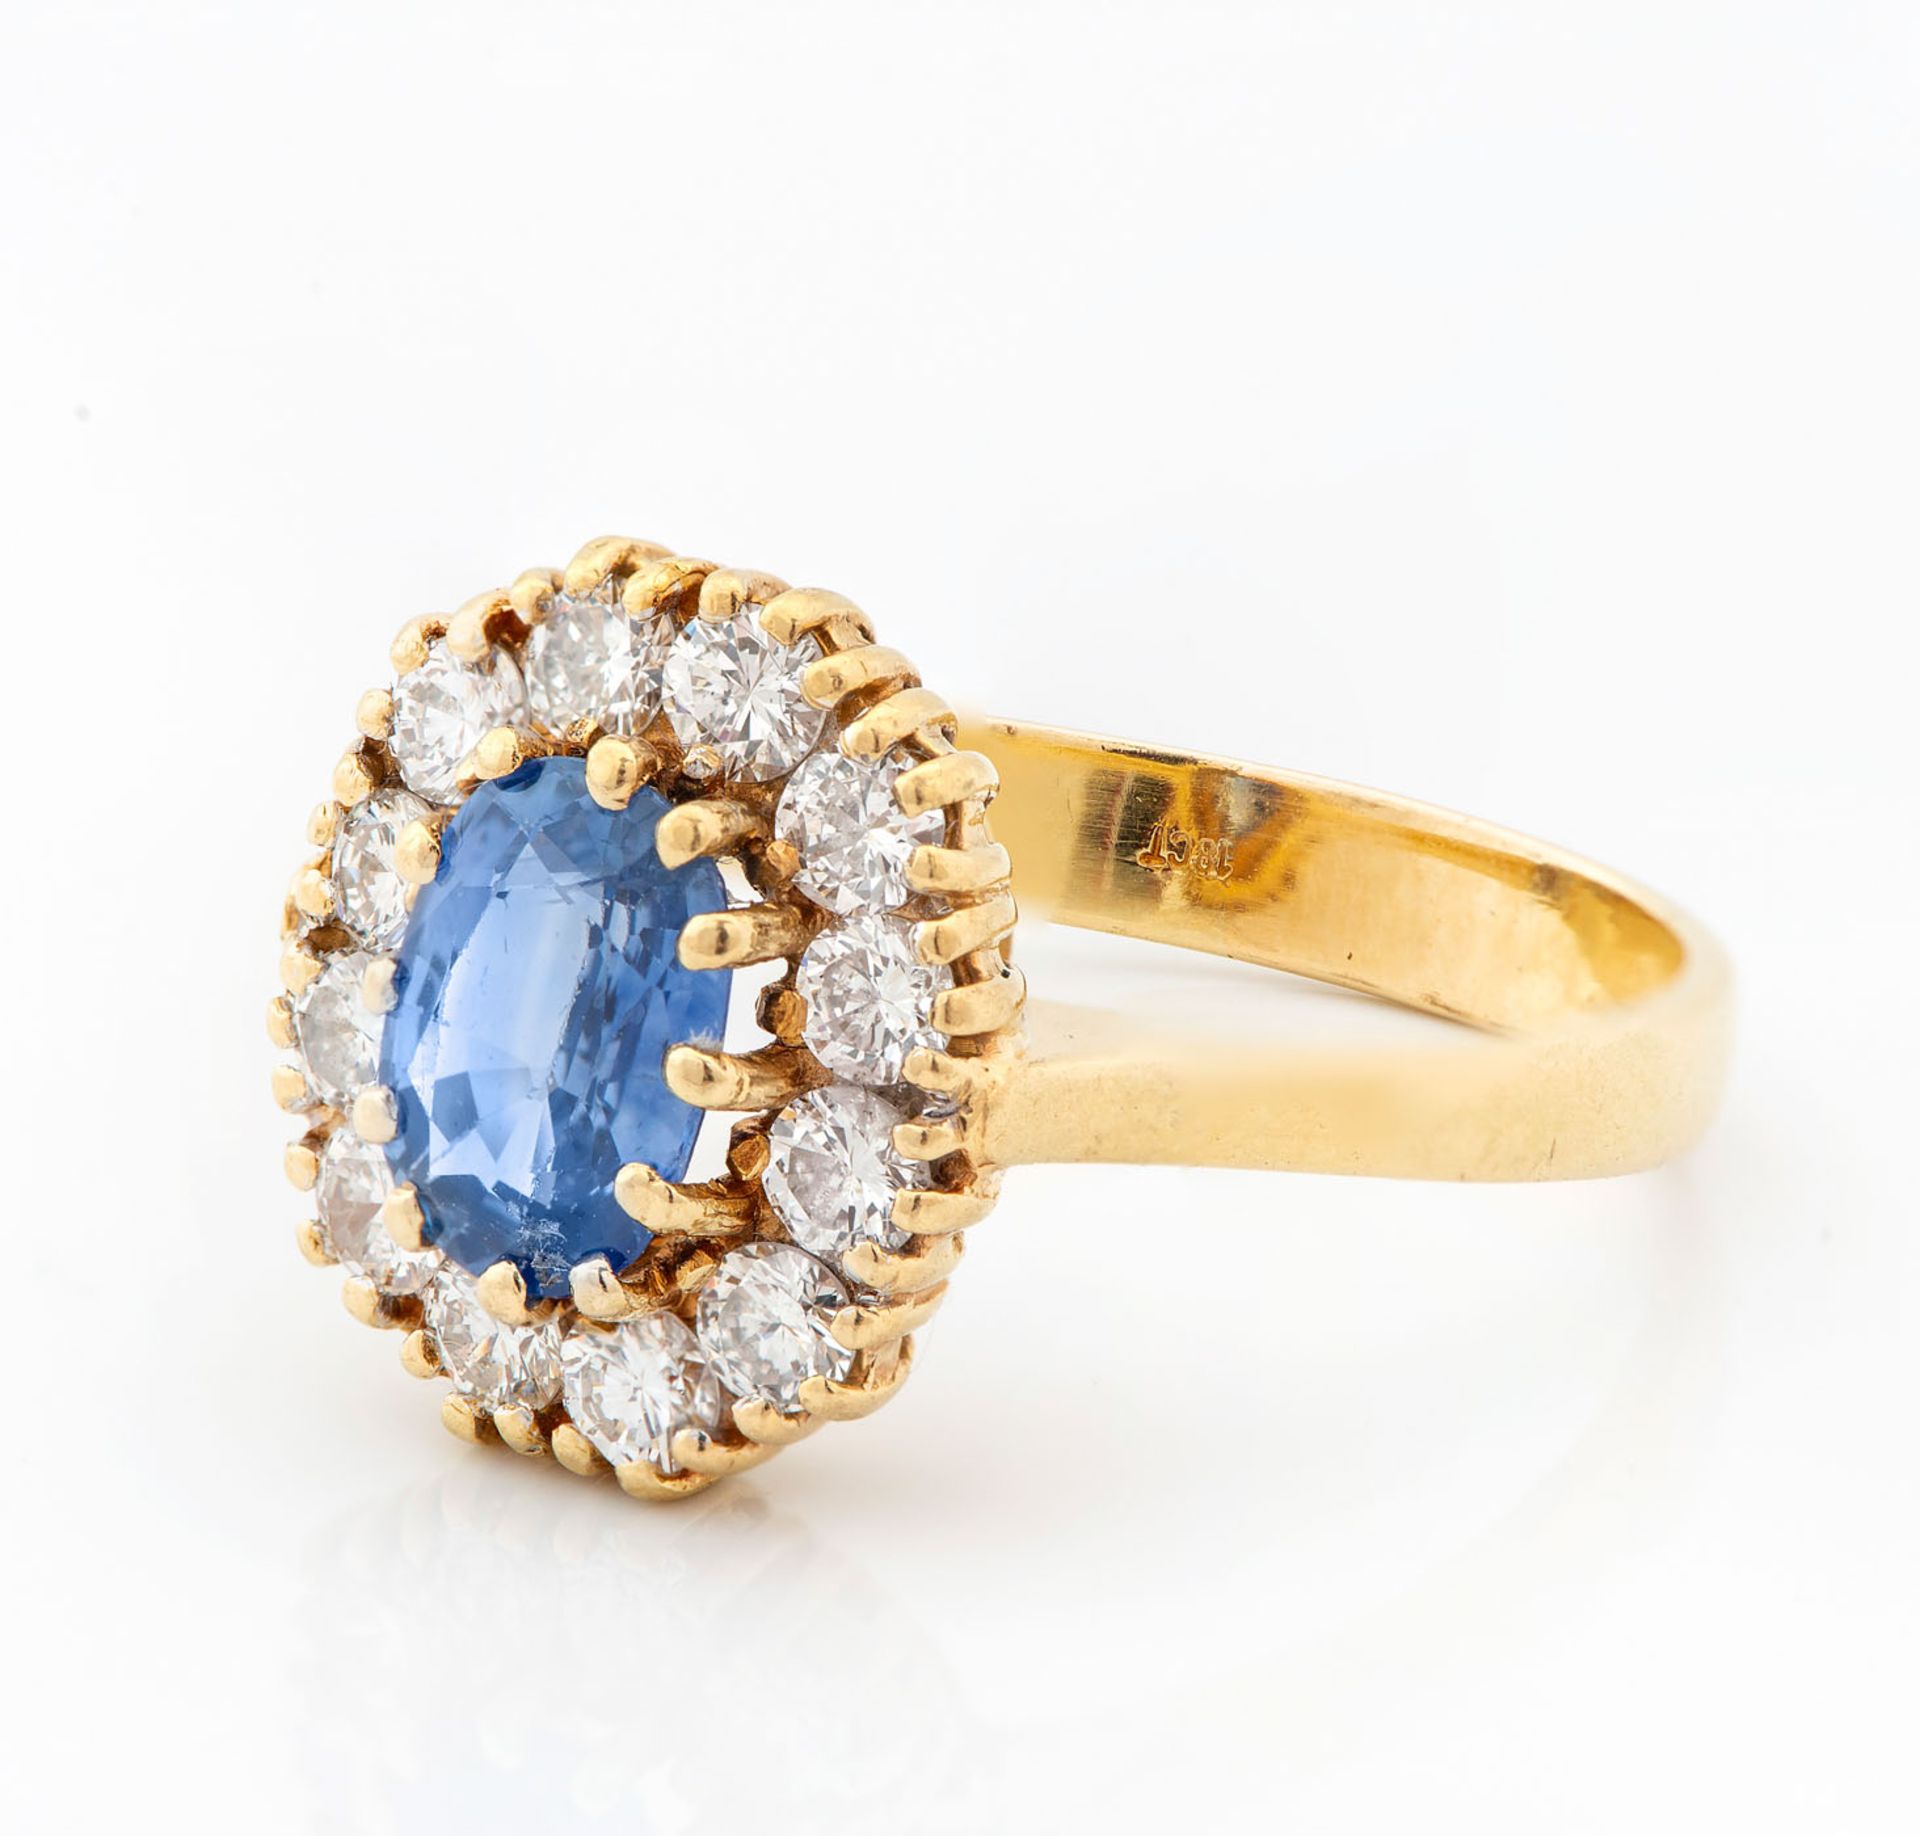 An 18K Gold Diamond and Sapphire Ring - Image 3 of 5